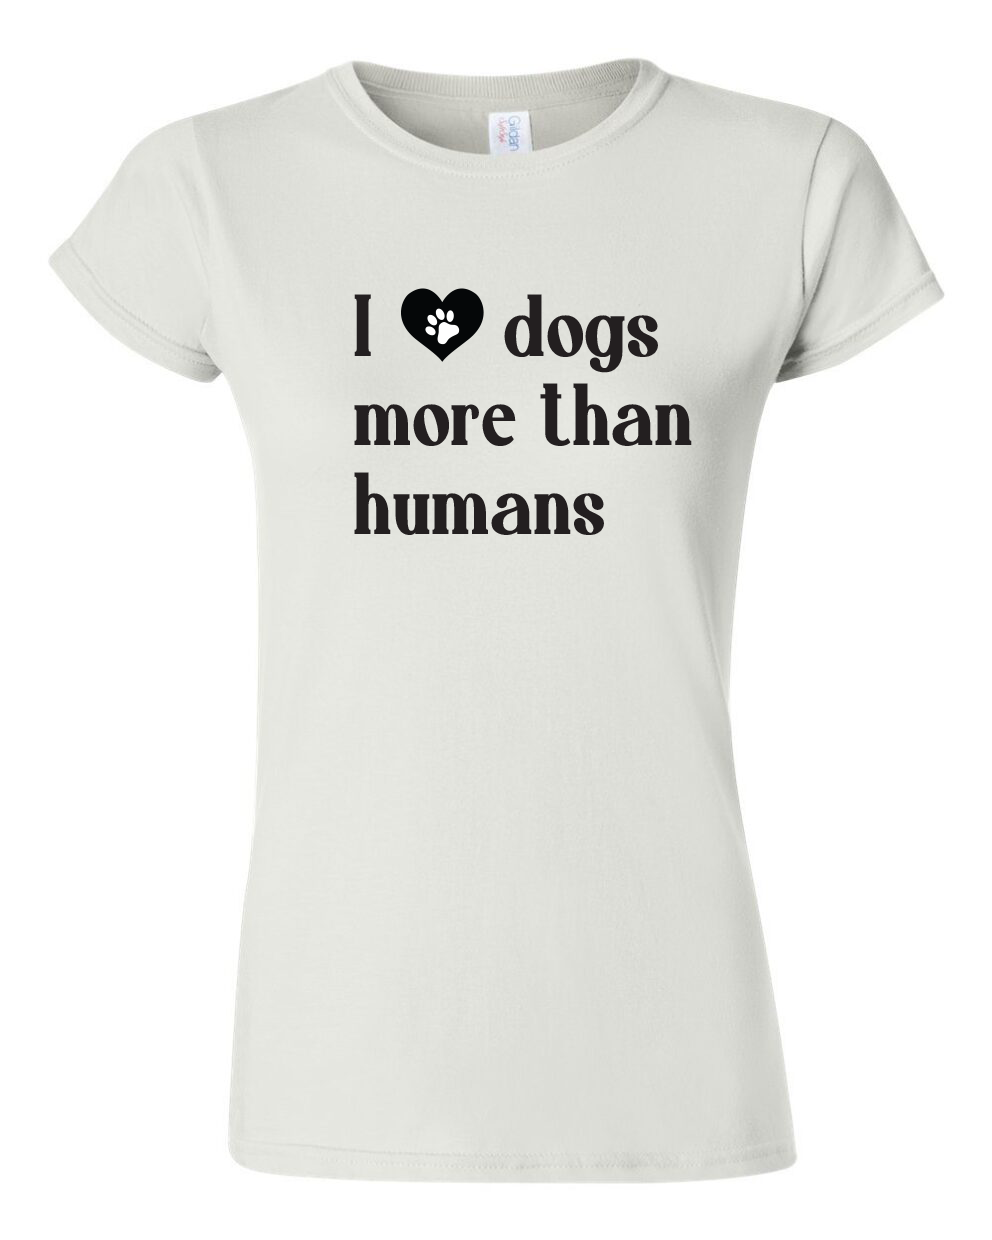 I heart dogs more than humans